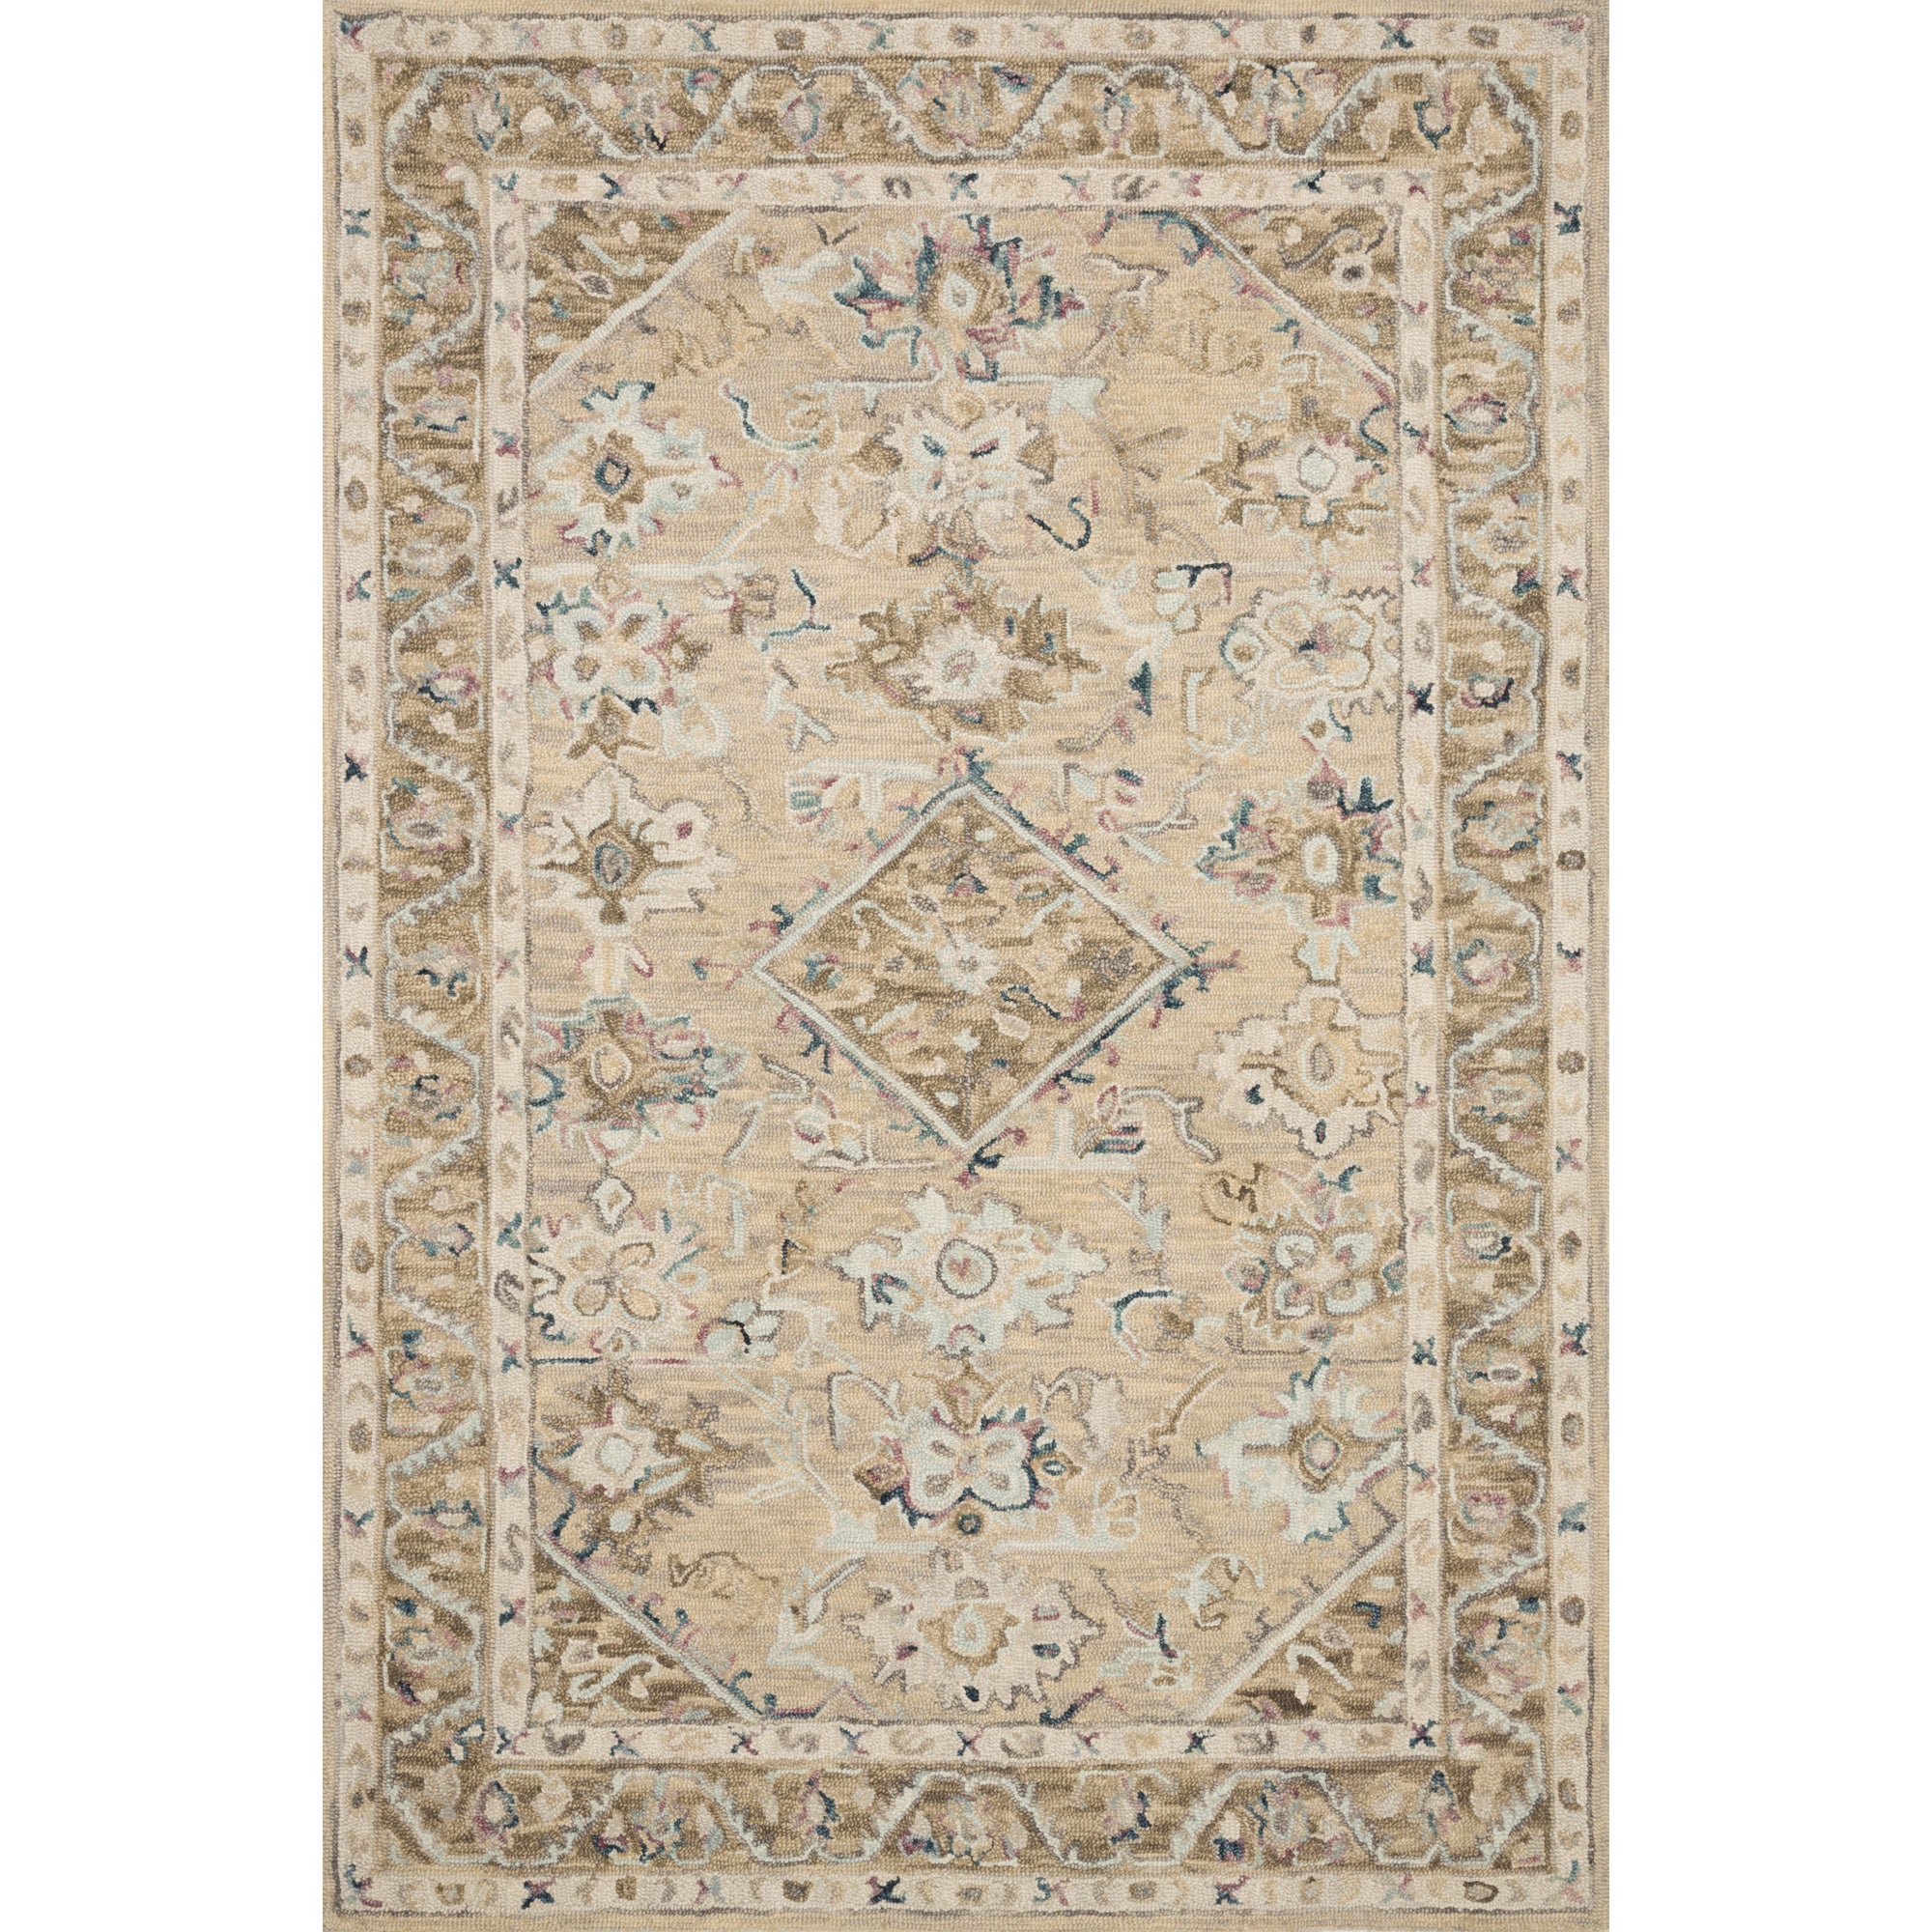 Rugs by Roo Loloi Beatty Beige Ivory Area Rug in size 18" x 18" Sample